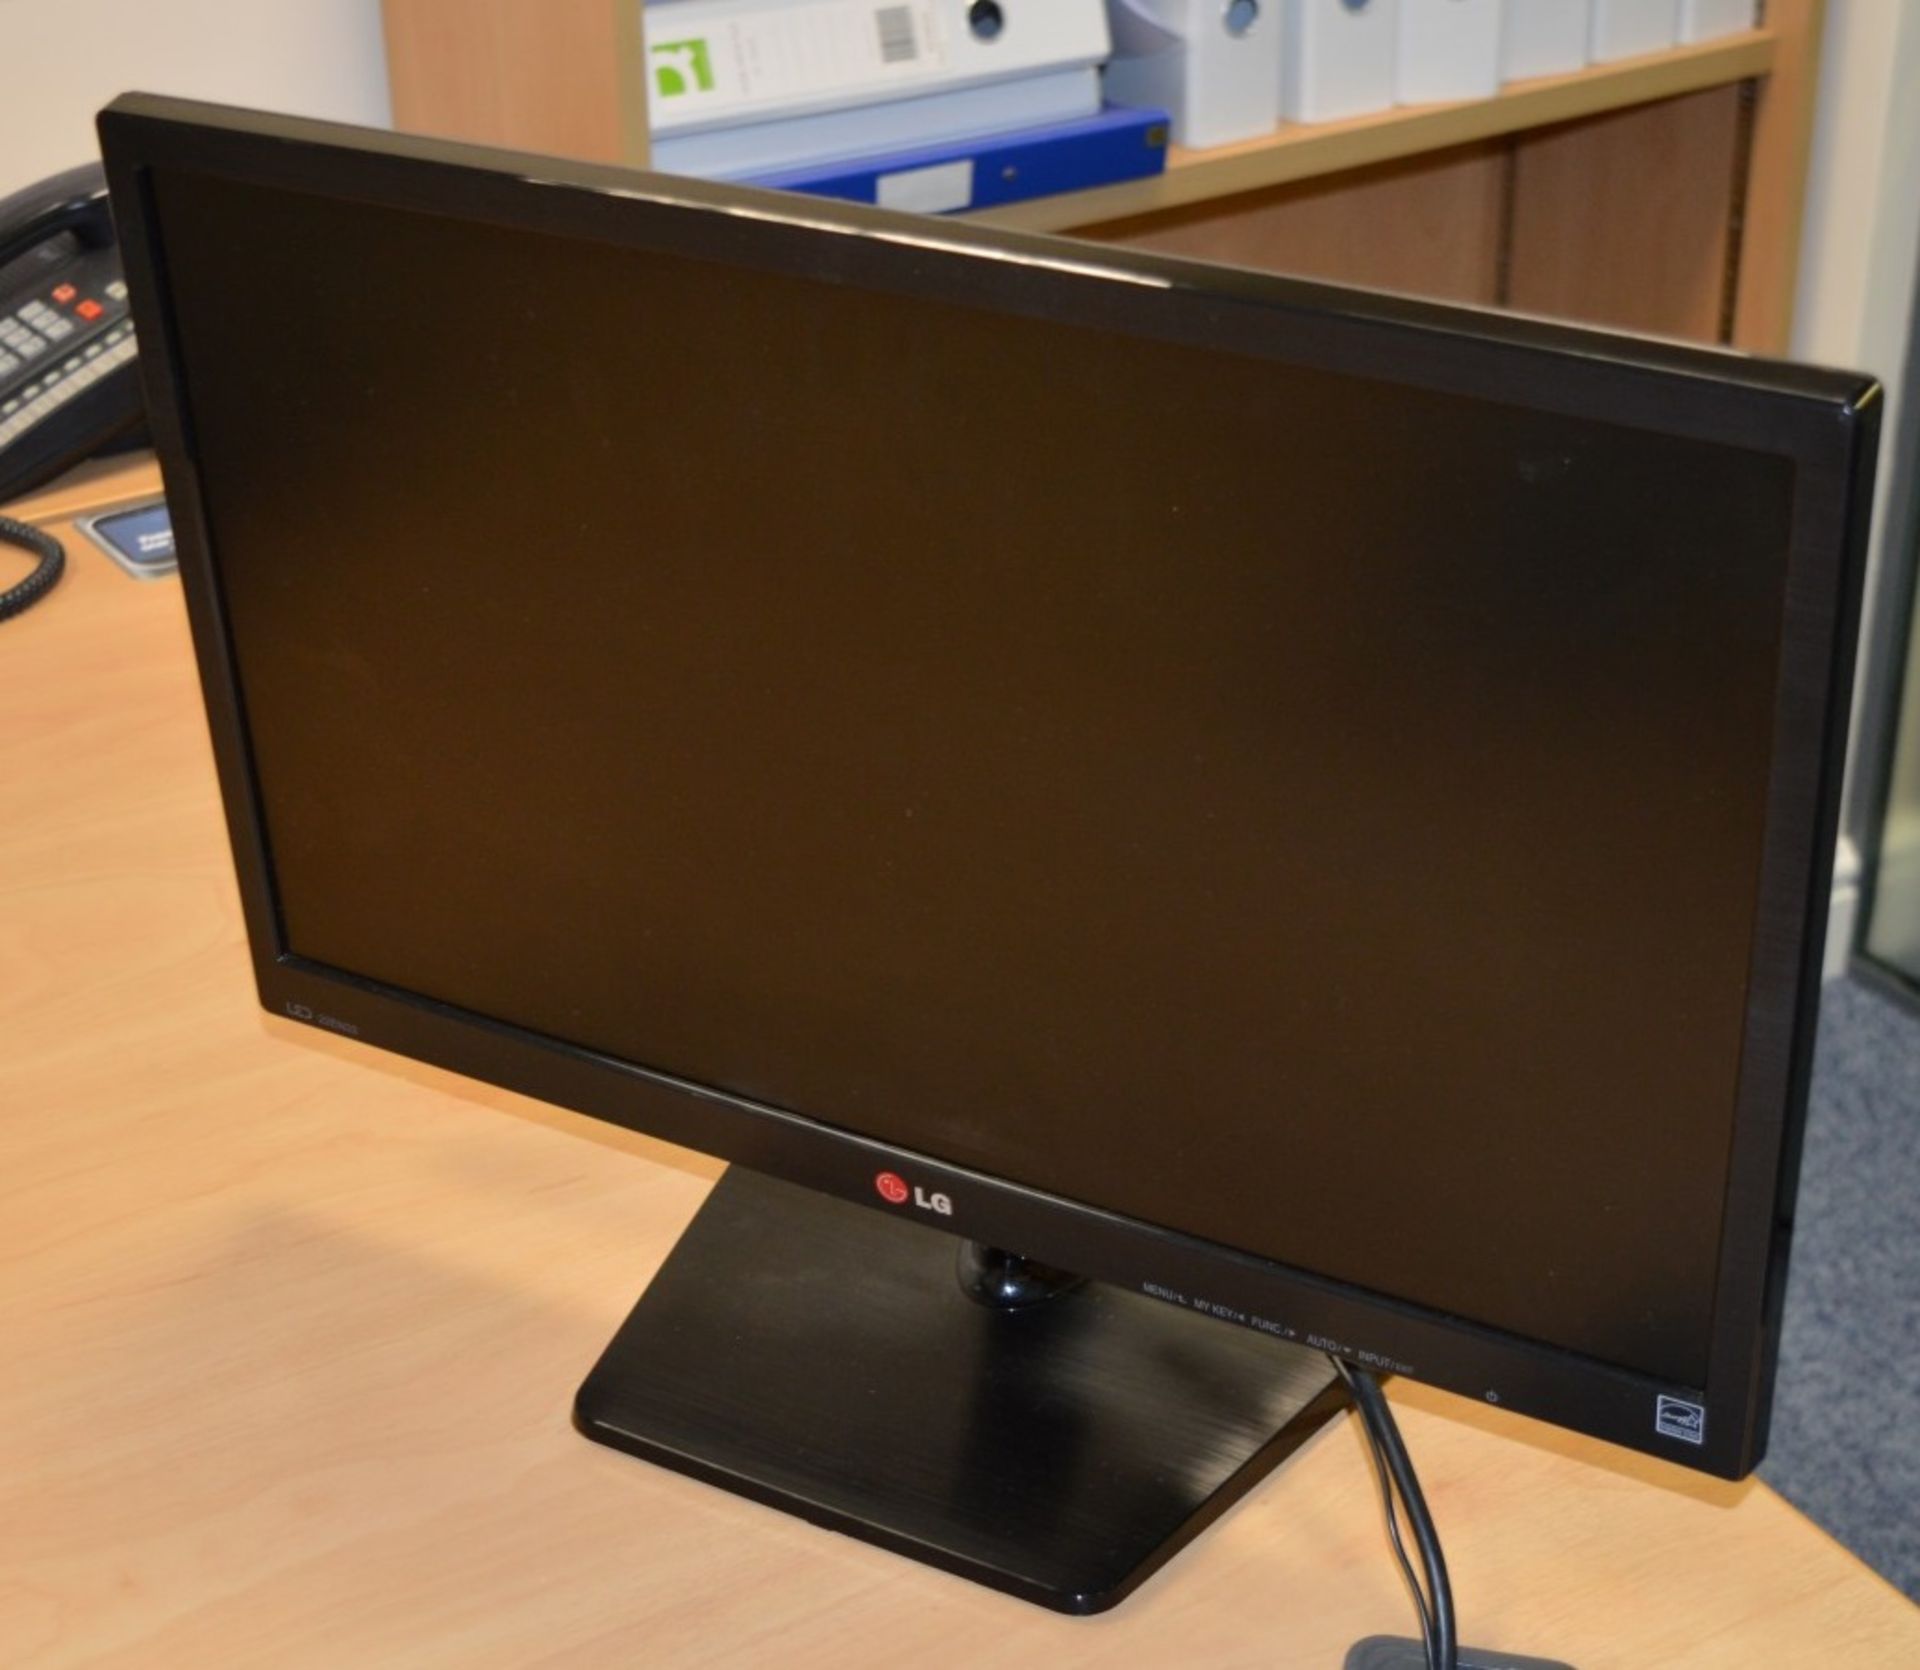 1 x LG Flatscreen LED Full HD 22 Inch Monitor With Cables - CL300 - Ref S116 - Location: Swindon,